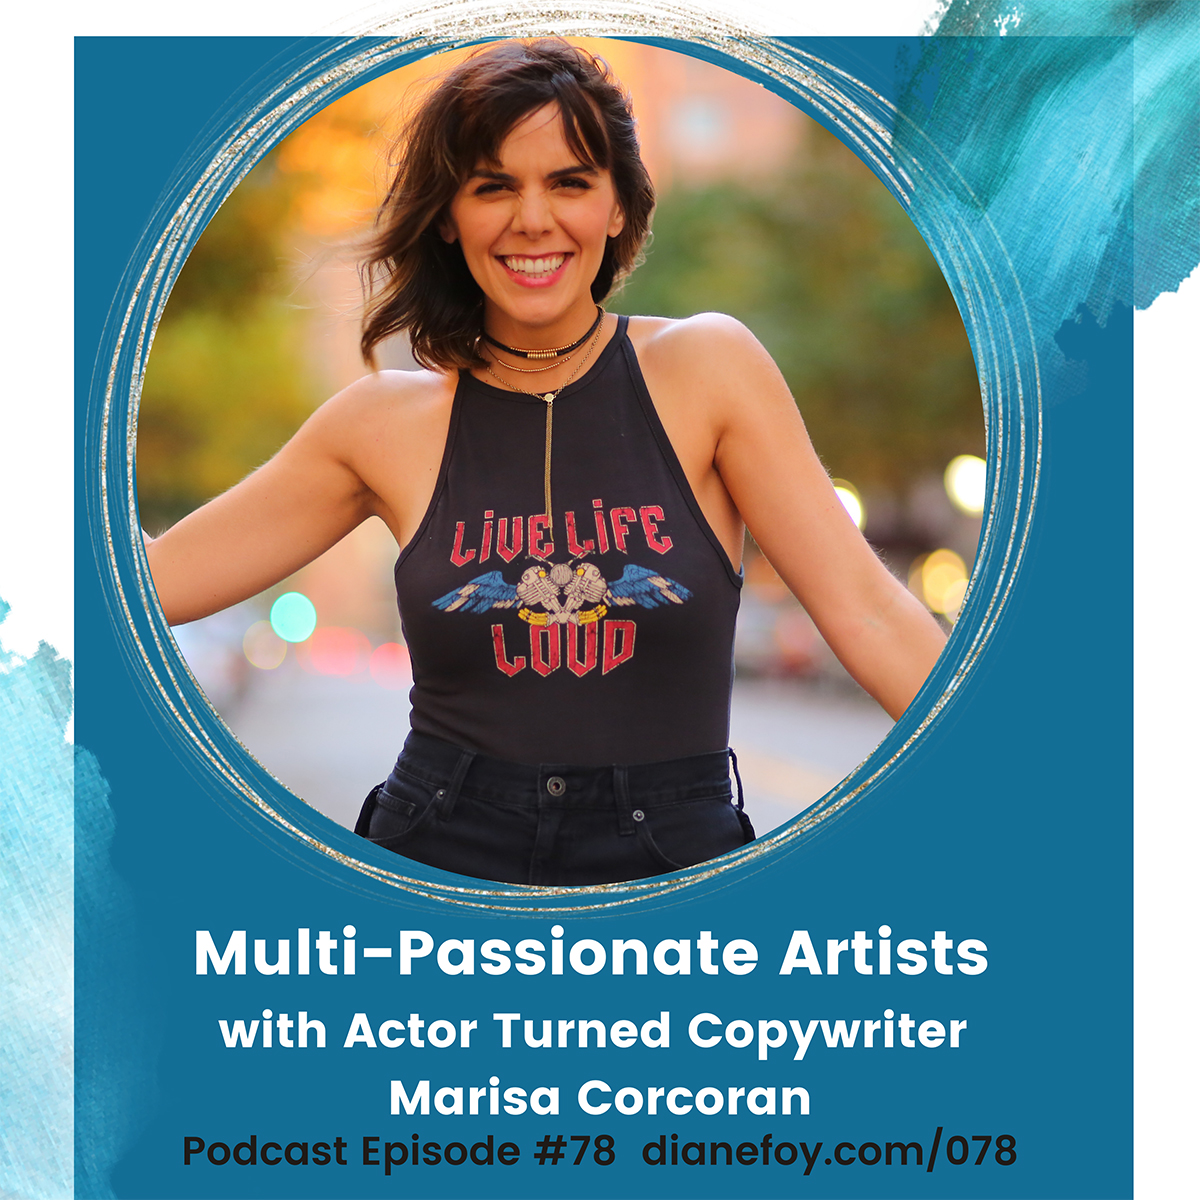 Multi-Passionate Artists Podcast withActor Turned Copywriter Marisa Corcoran on Crafting Personality-filled Copy